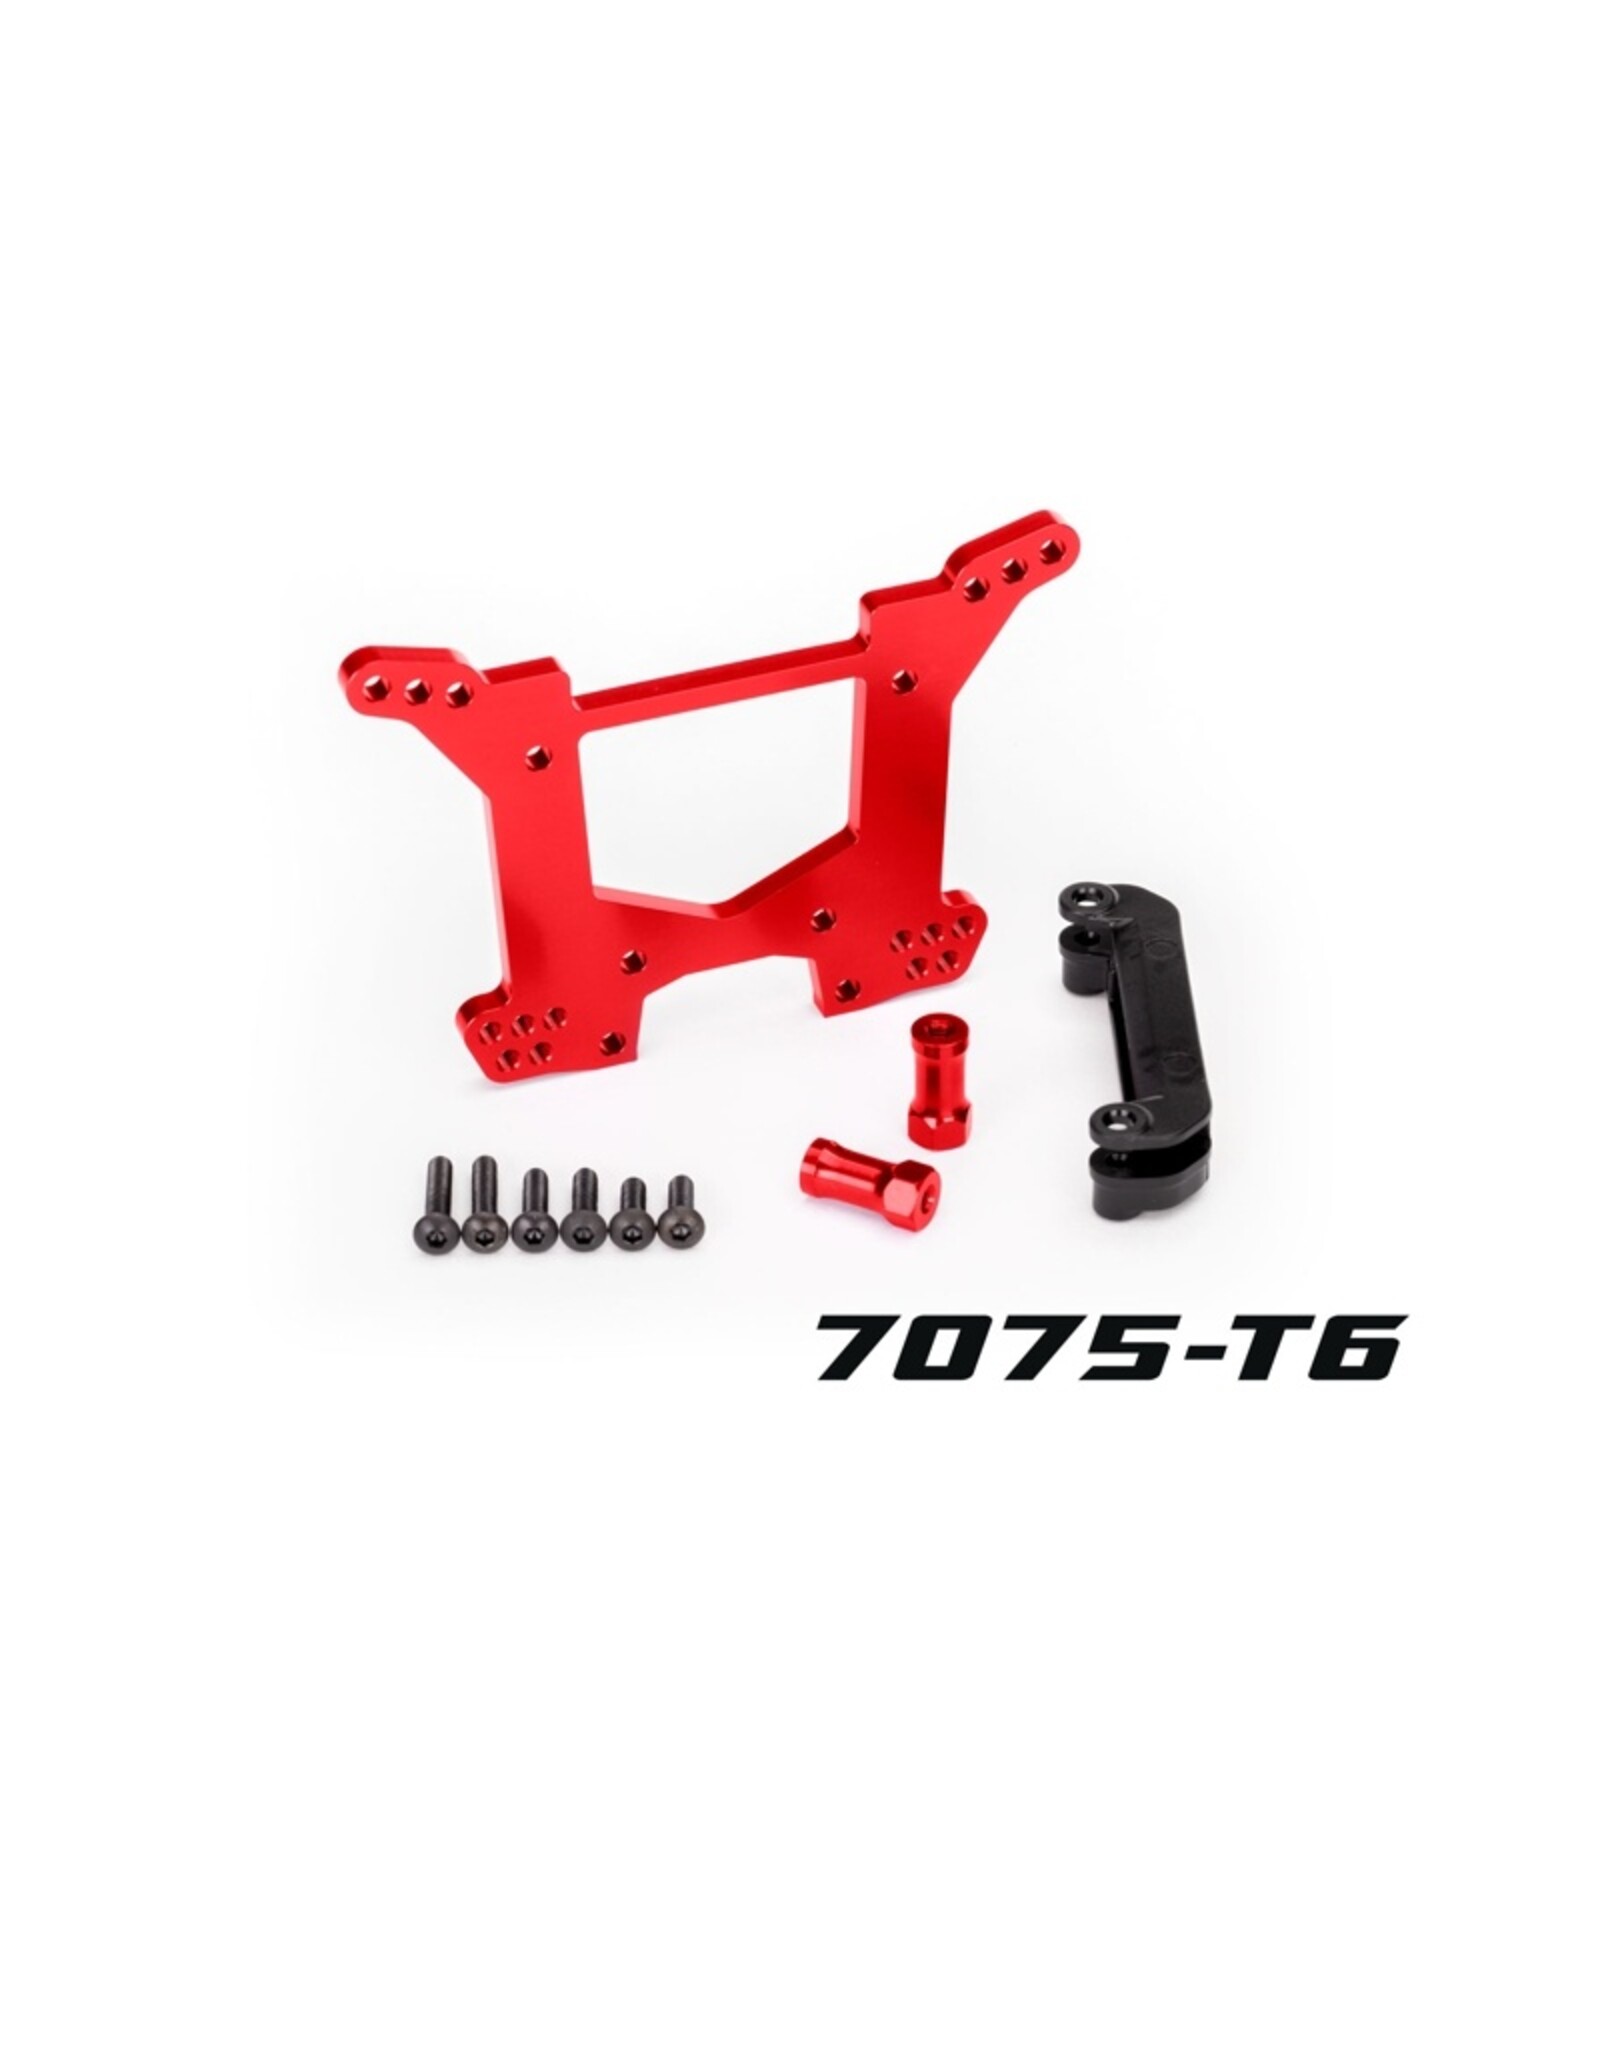 Traxxas TRA6738R - Shock tower, rear, 7075-T6 aluminum (red-anodized) (1)/ body mount bracket (1)